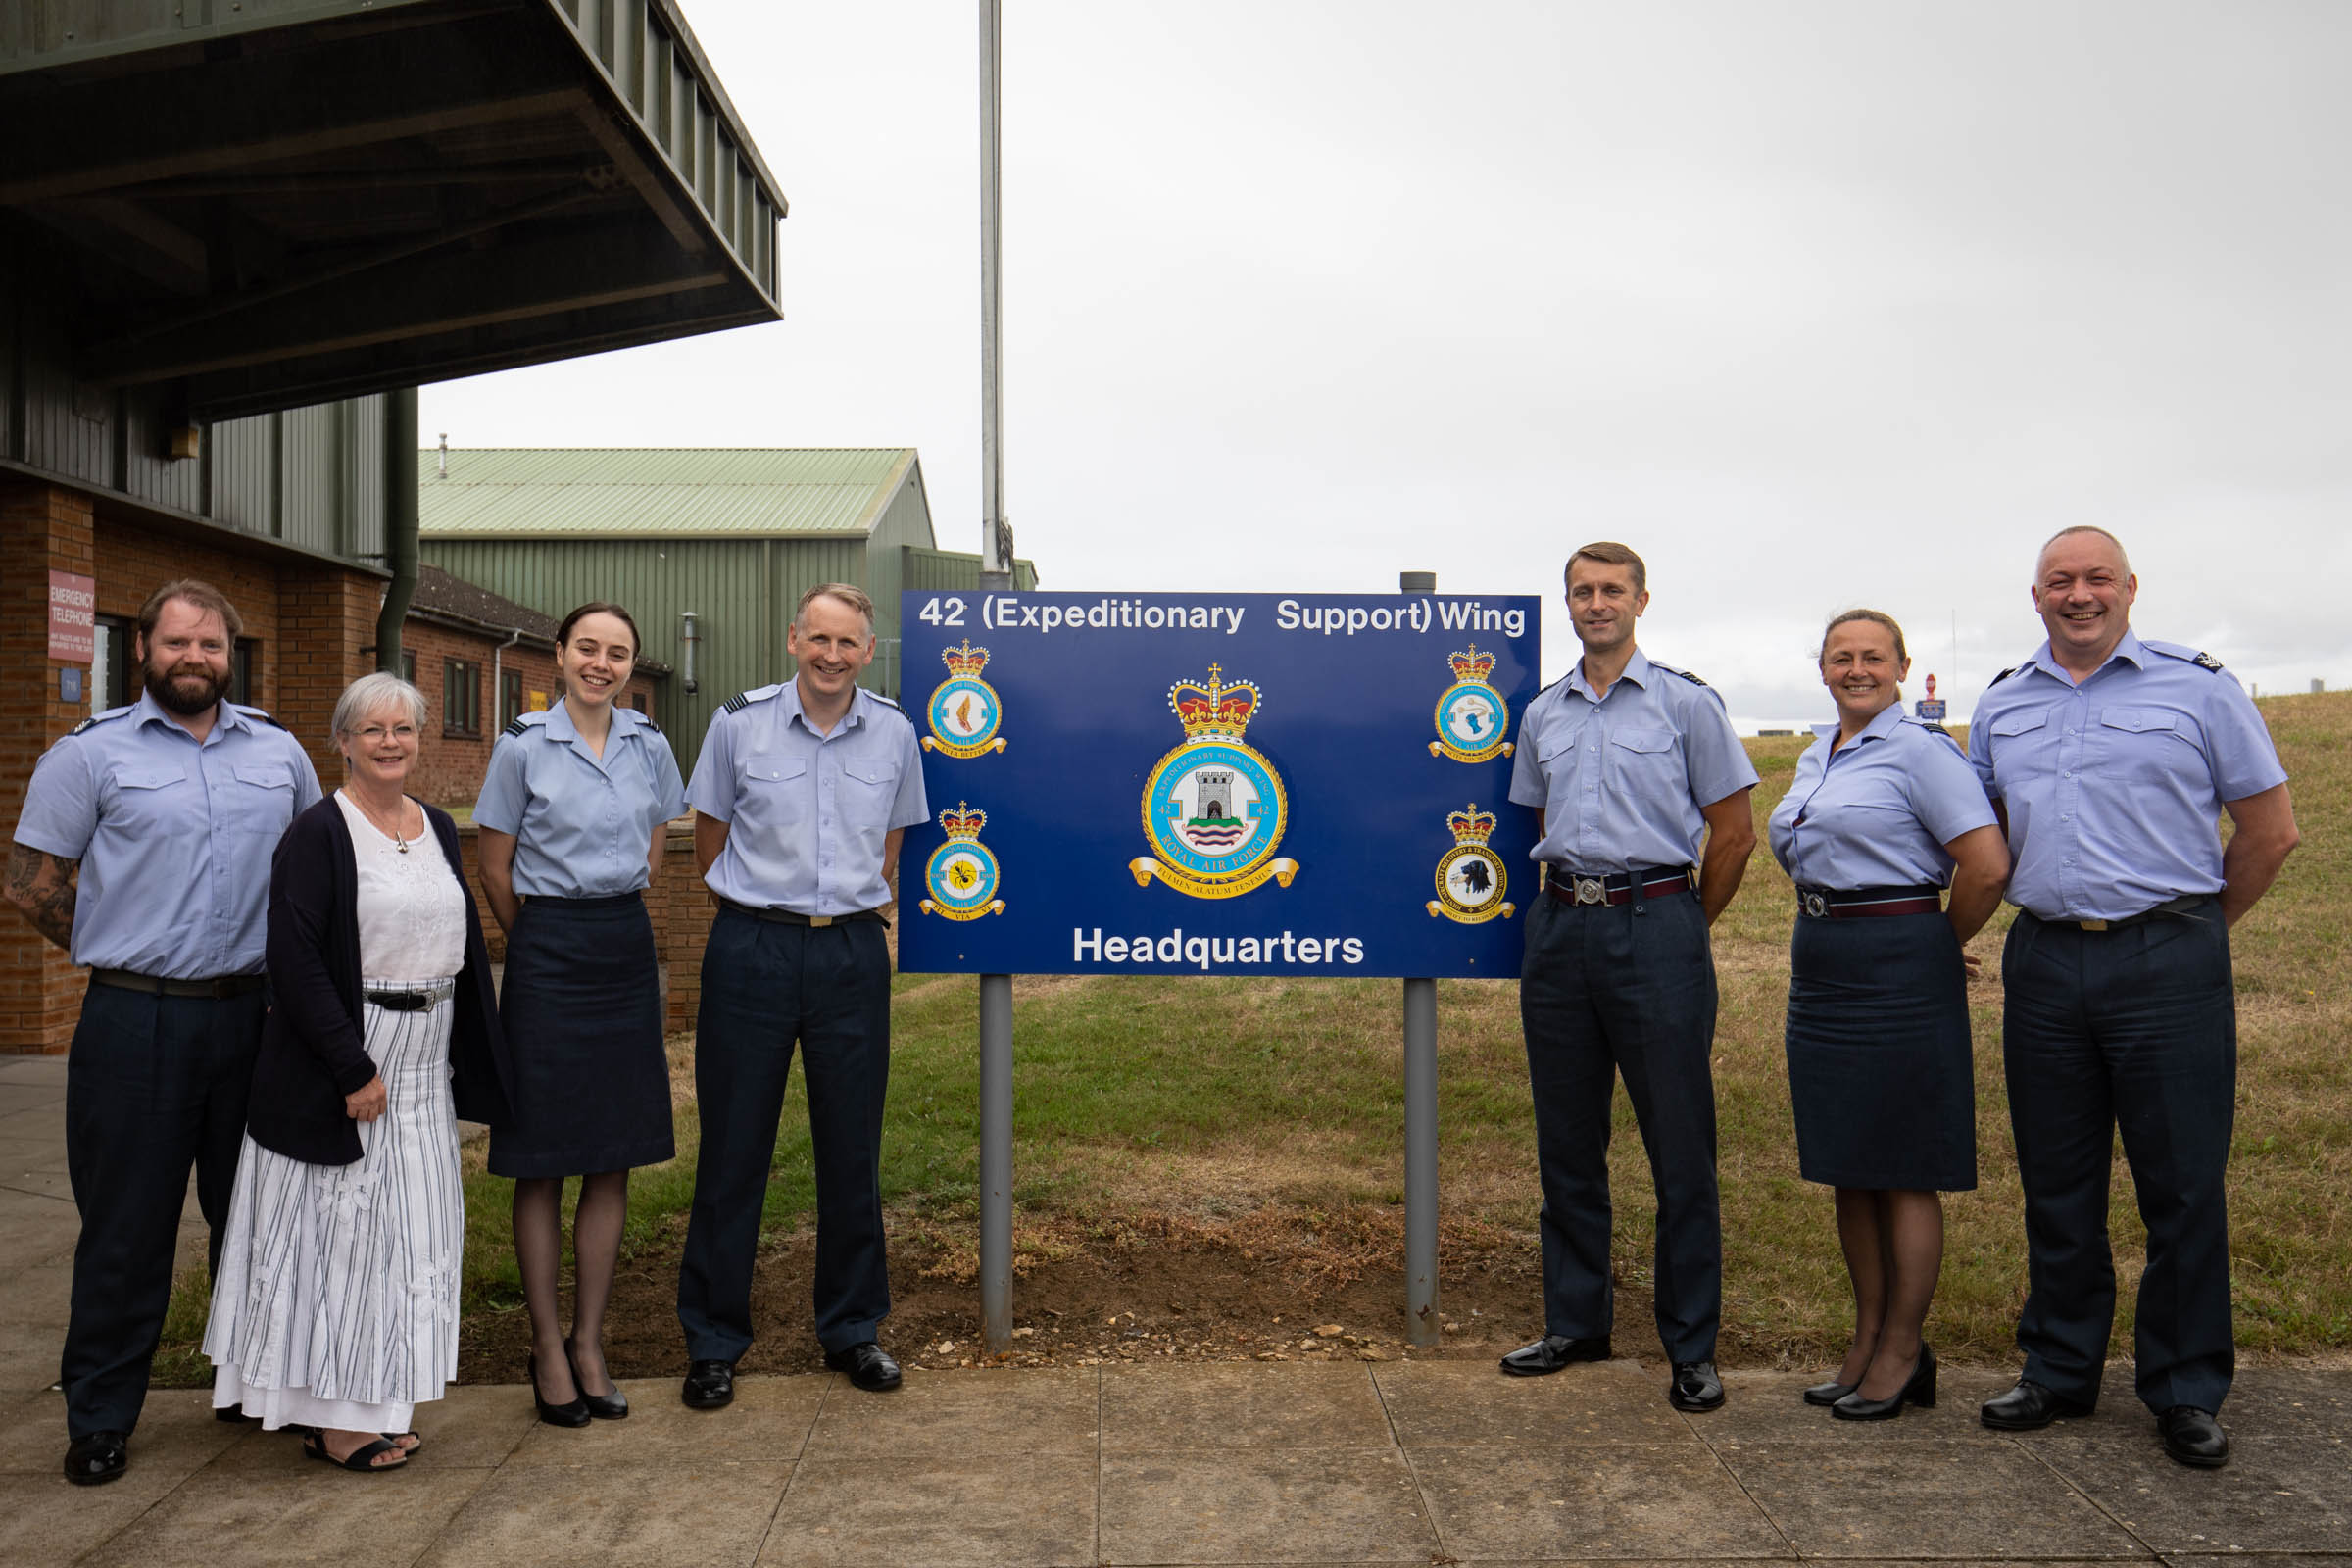 From left to right: The 42 Wing headquarters team, Sgt Peter Gwilliam, Mrs Carol Croft, Flt Lt Grace Paine, Wg Cdr Matt Smith, Wg Cdr Mike Dutton, Flt Lt Miriam Aicheler and Chief Tech Phil Meagre